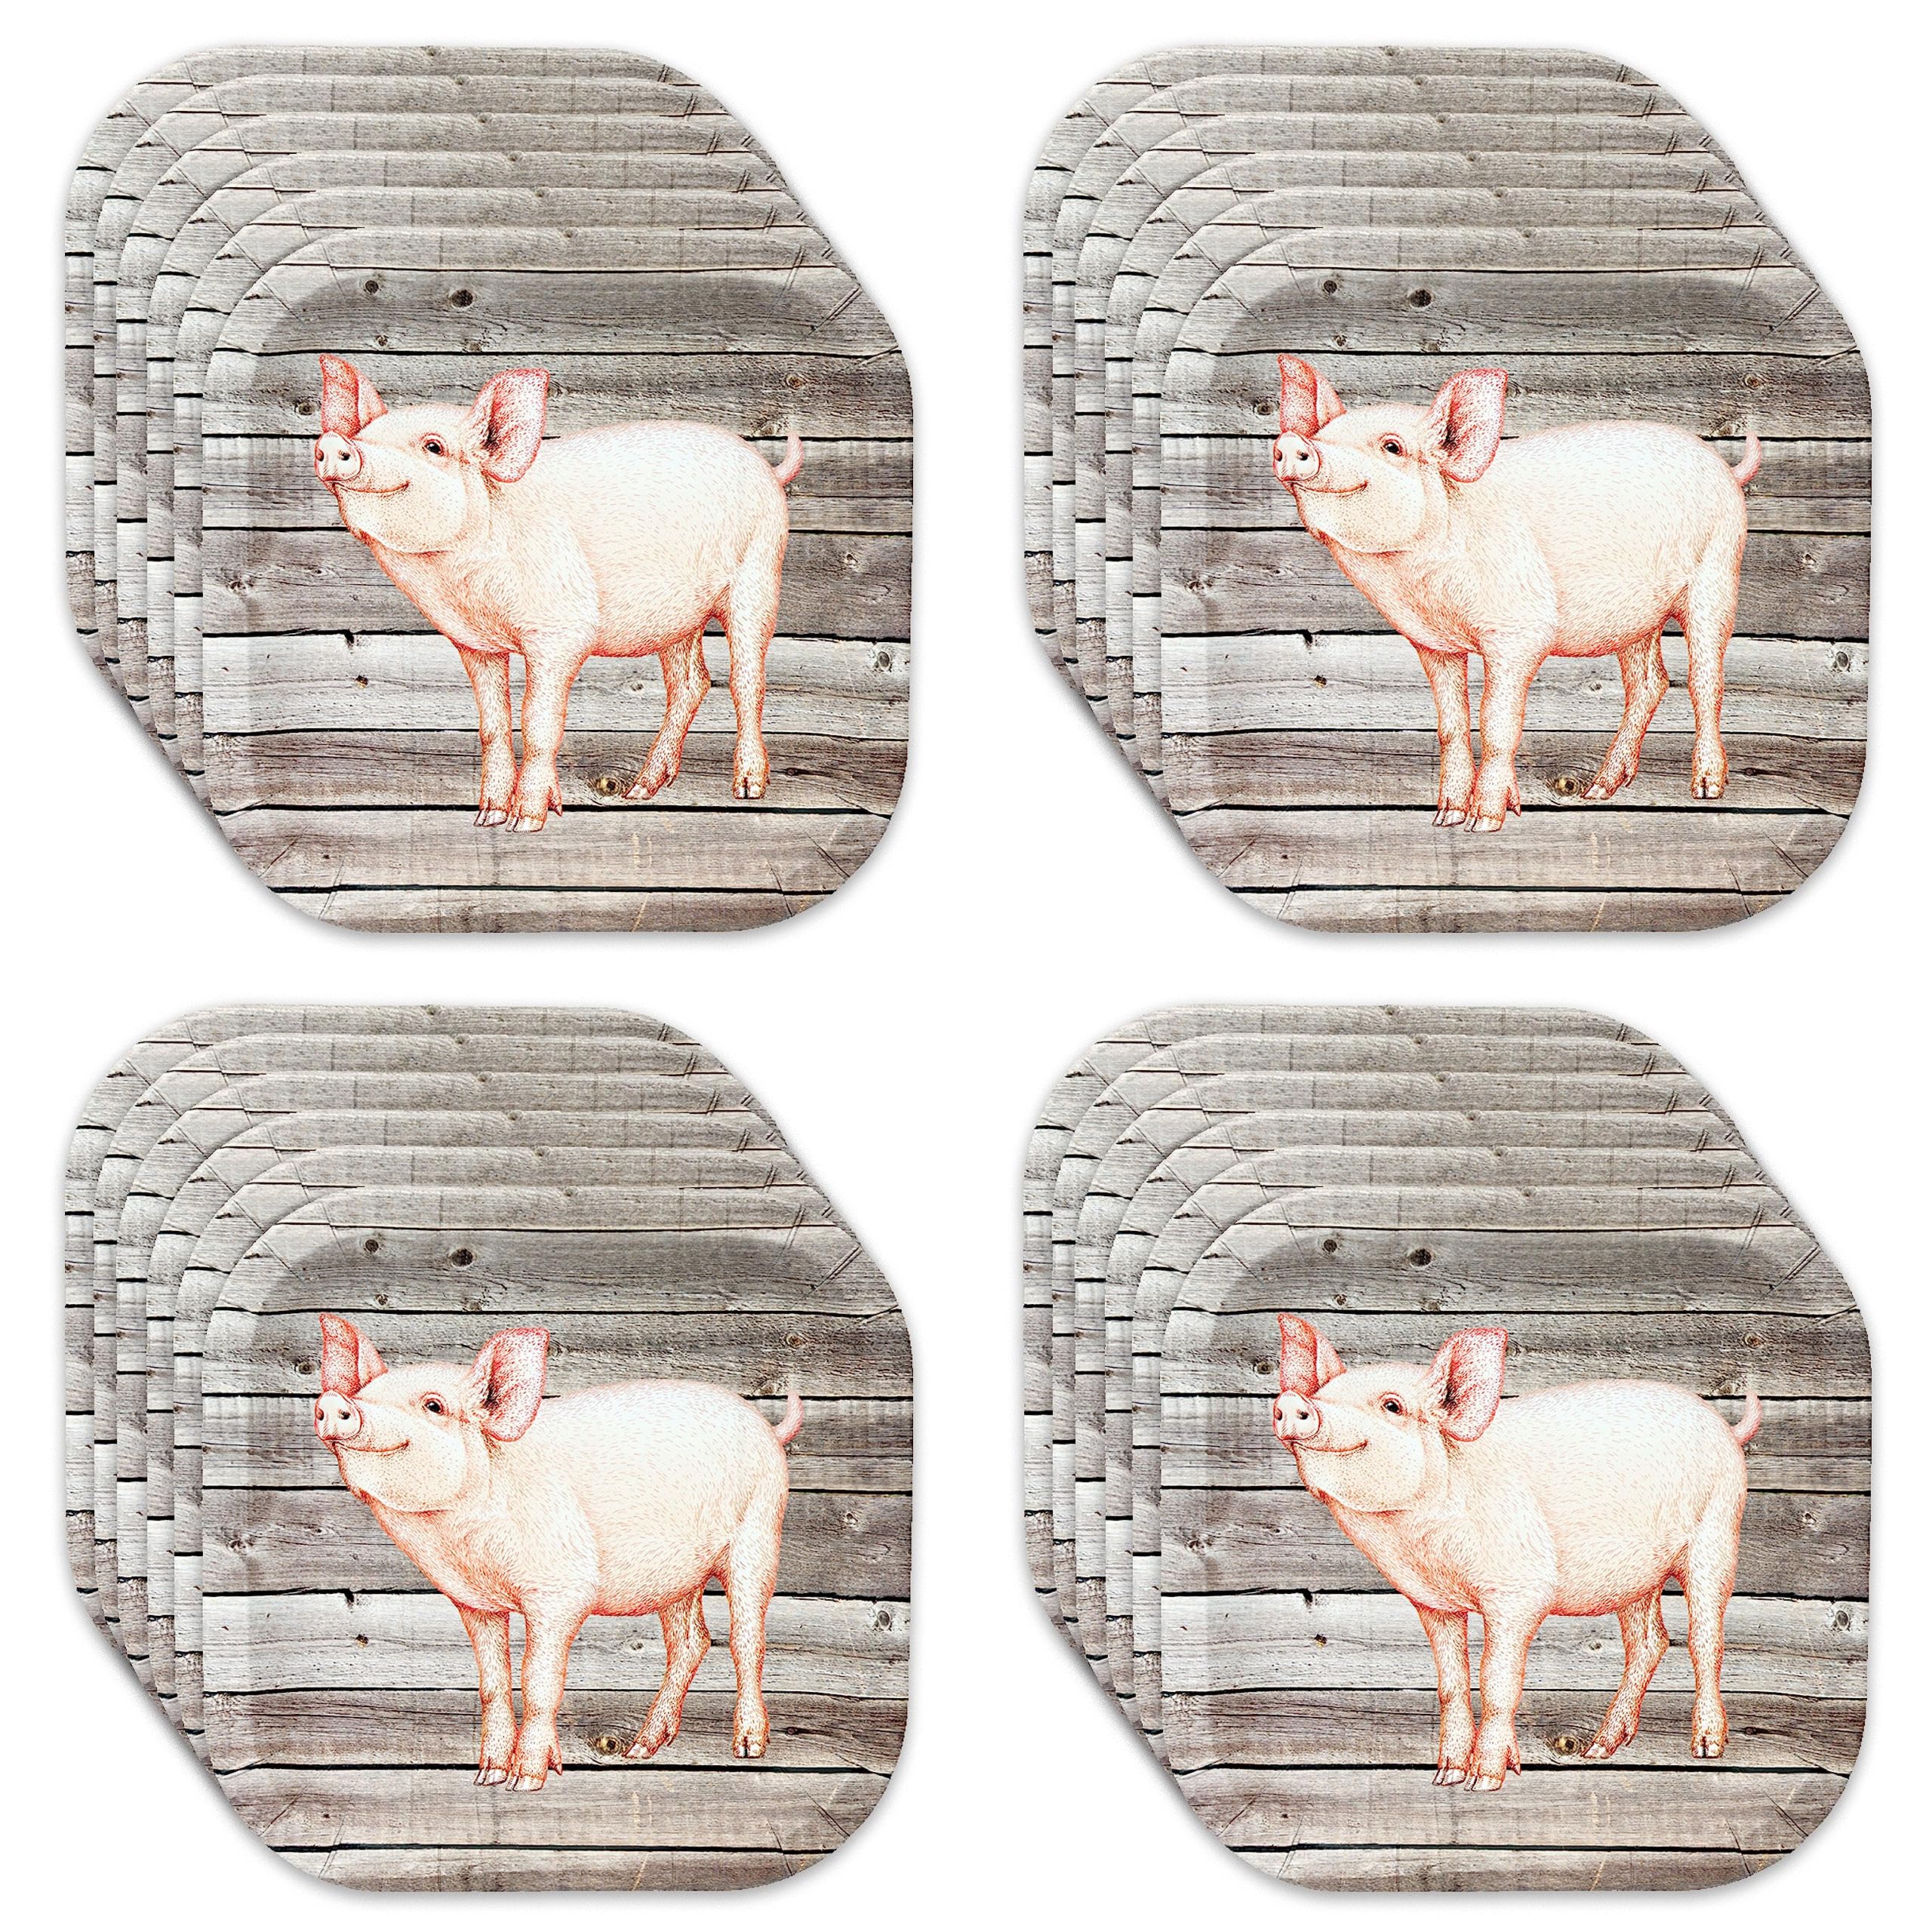 Havercamp Pig 9” Plates on Barnwood (24 pcs.)! Authentic and Cute Pig on a Rustic Barnwood Background. 24 Lg. 9 in. Square Dinner Plates. Pair with the Farm Table Collection!